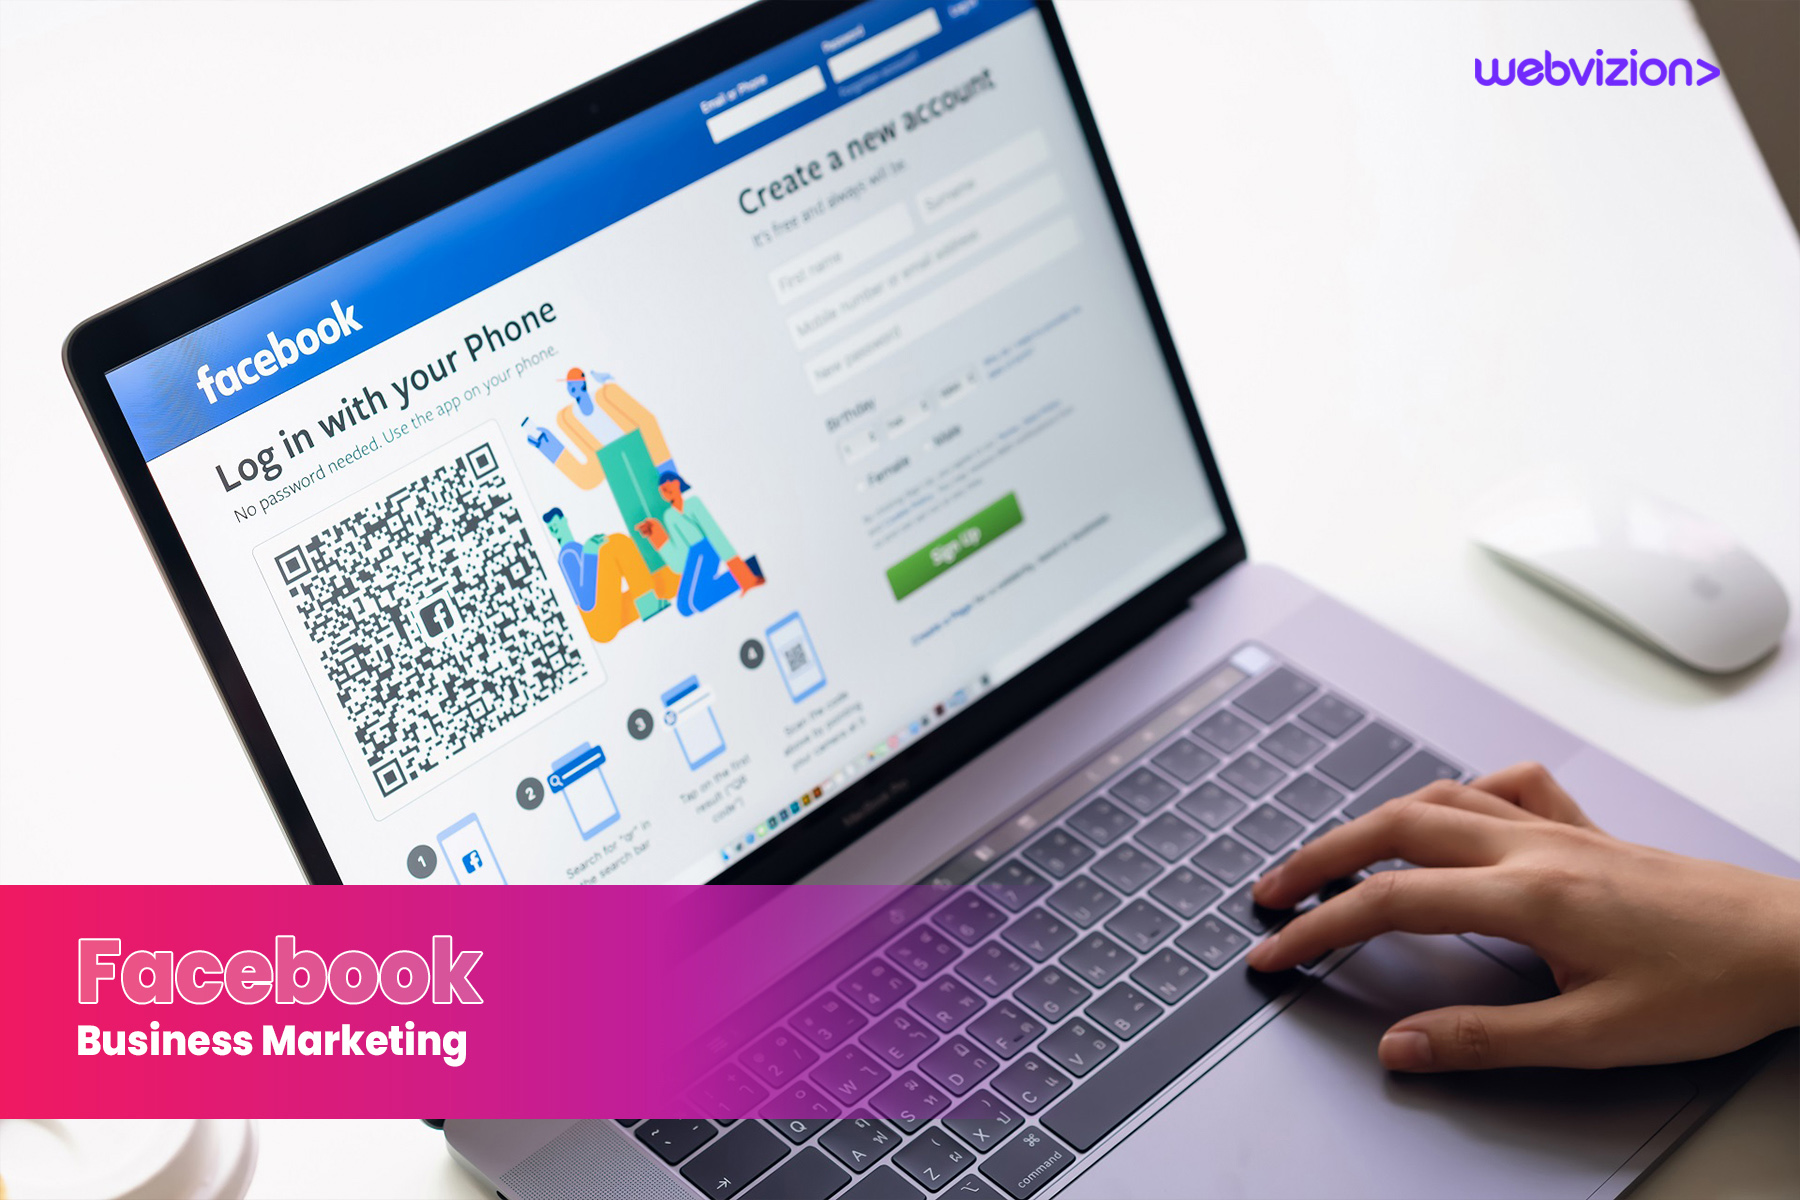 The Basic Guide To Marketing Your Business On Facebook